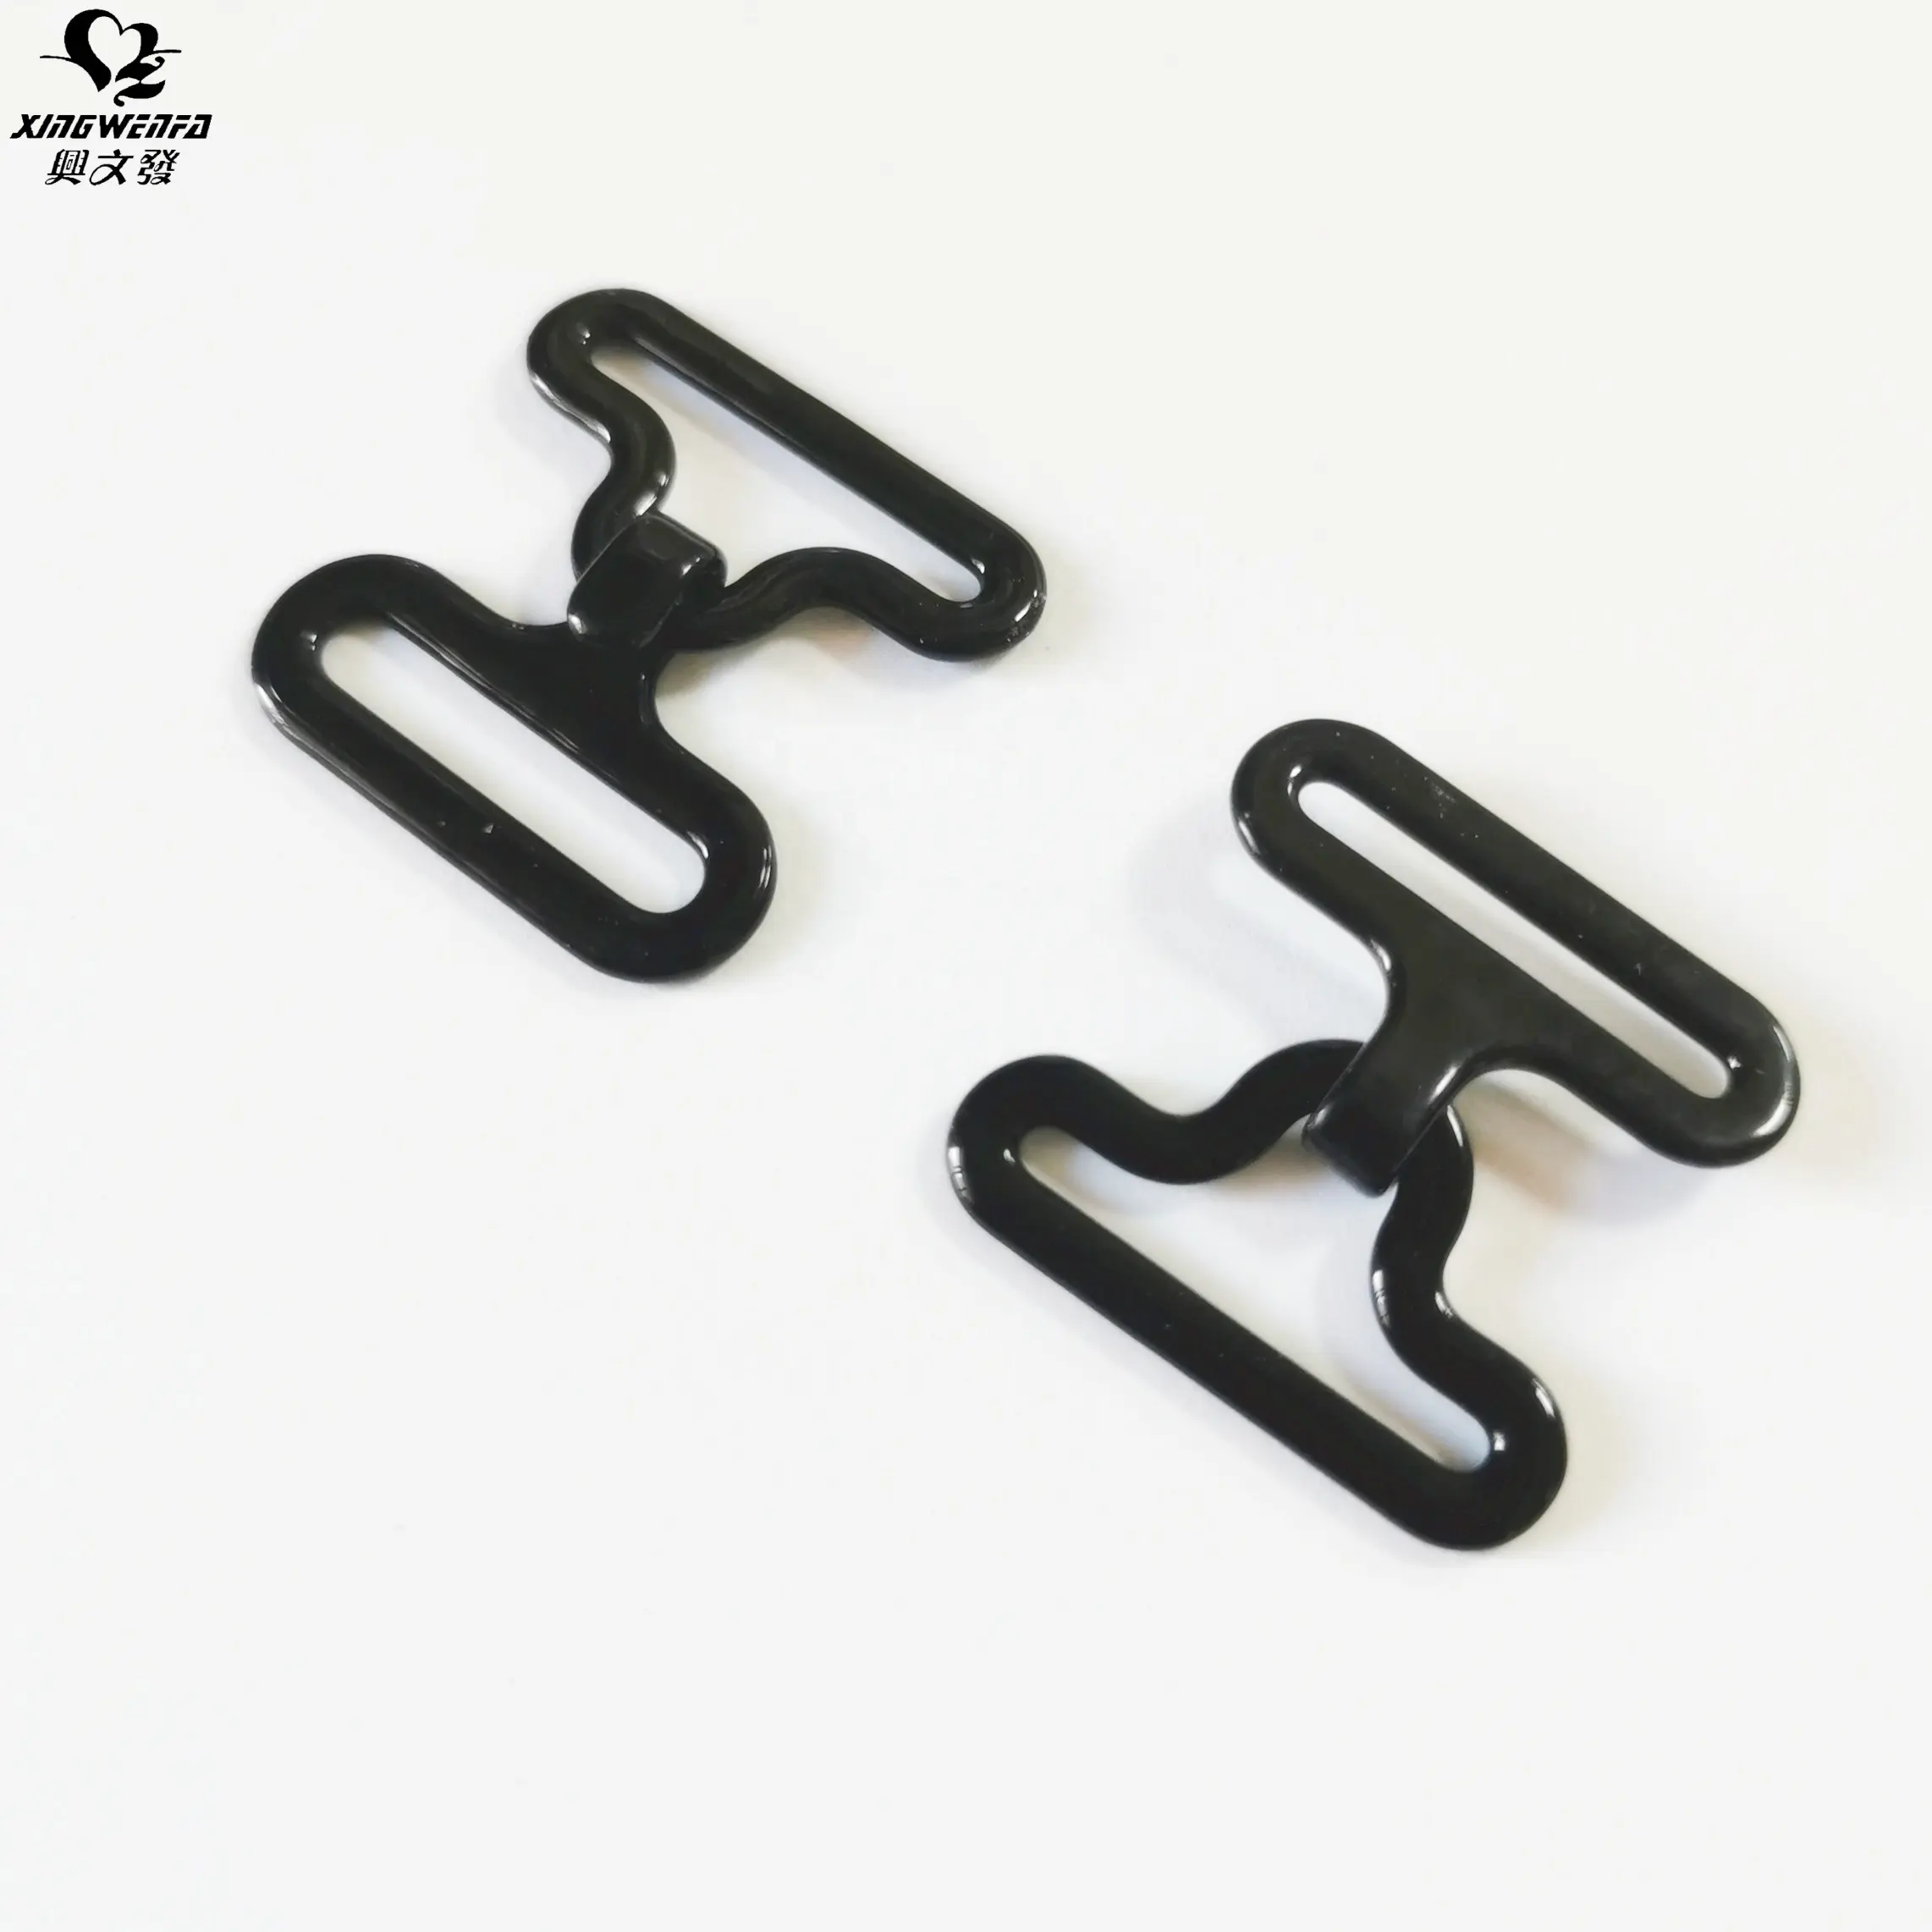 Garment accessories A20 J 20 bow tie clasp nylon coated metal belt buckle strap metal clasps for bow tie